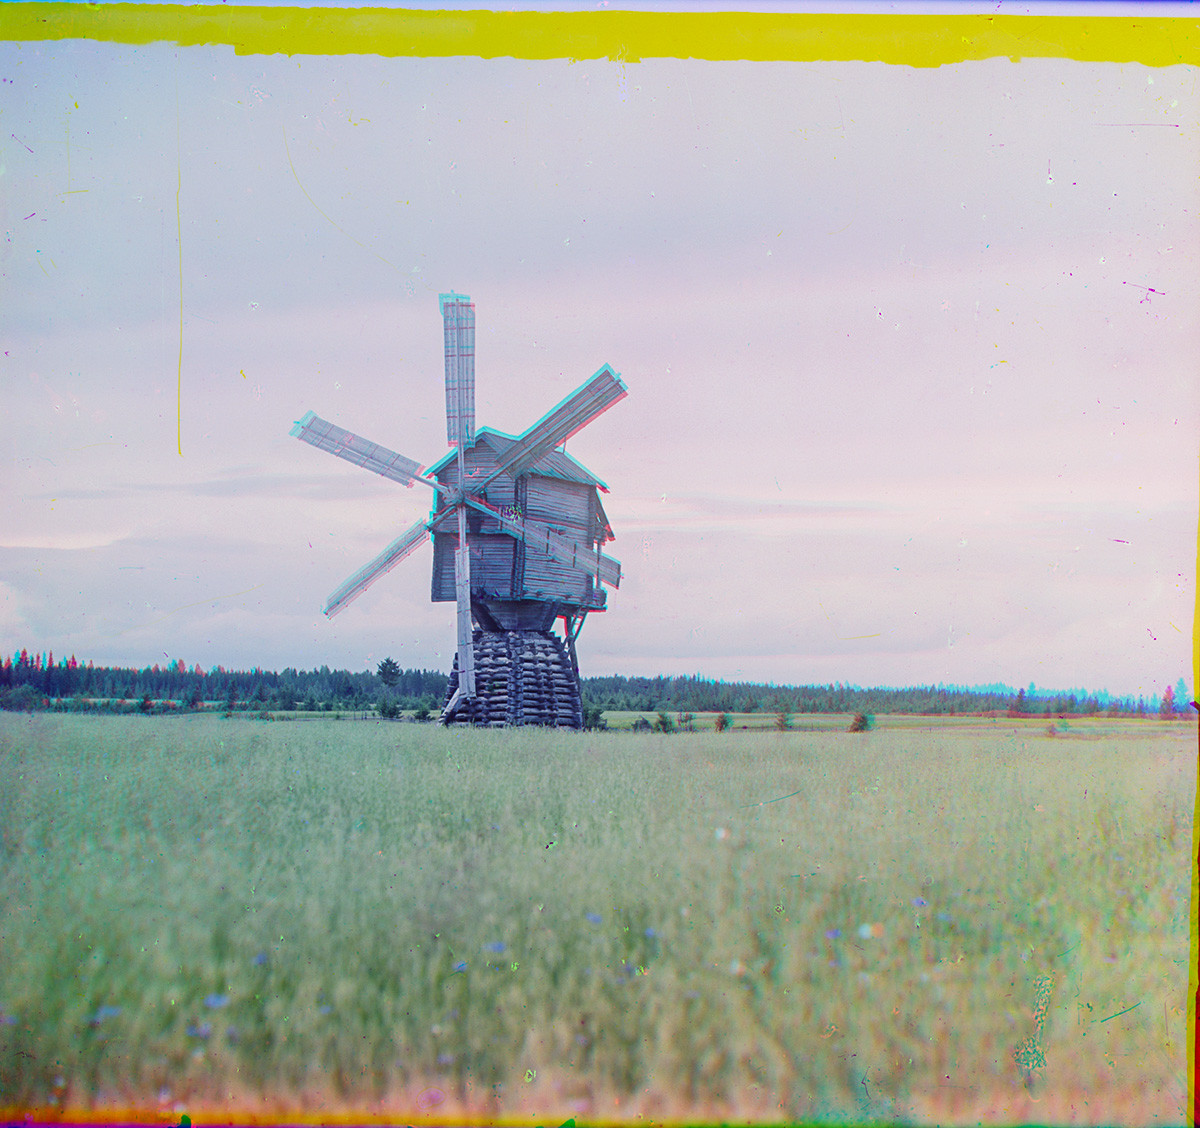 Leushino (Cherepovets district). Six-bladed post mill of tolcheya type, which pounded grain instead of grinding. Village now submerged in Rybinsk Reservoir. Summer 1909